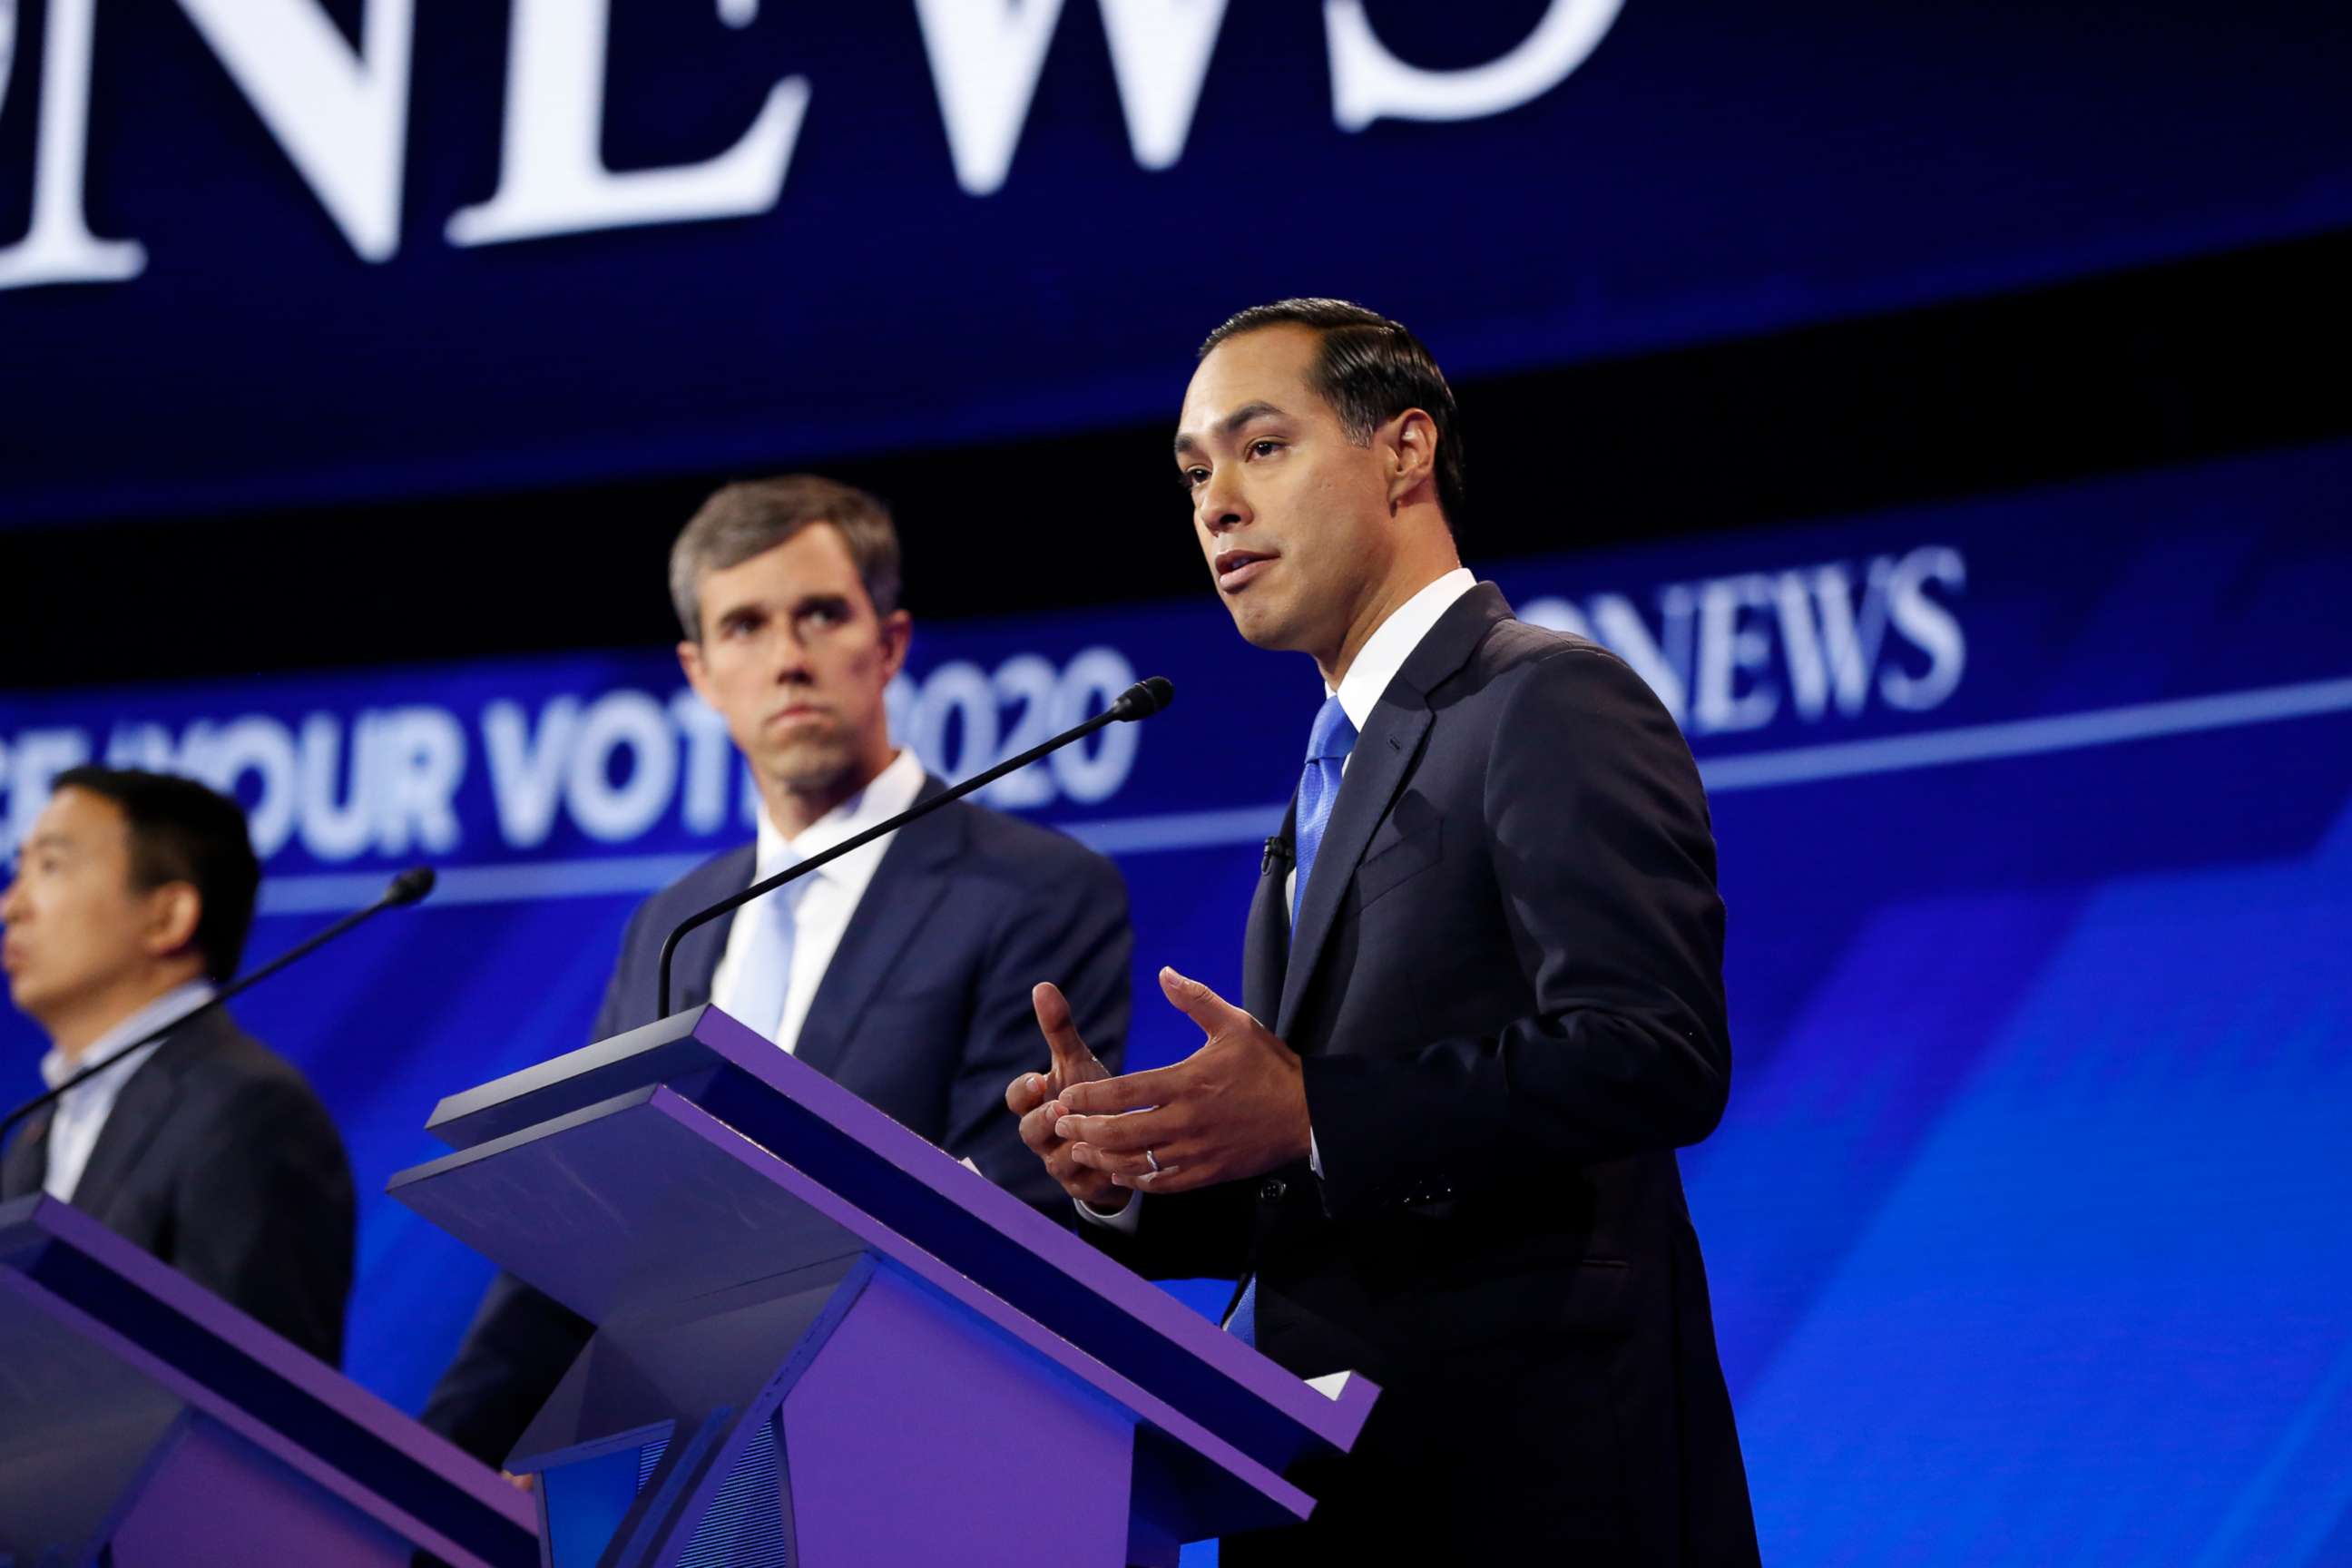 PHOTO: Beto O'Rourke watches while Julian Castro speaks during the third Democratic Primary Debate, in Houston, Sept. 12, 2019.